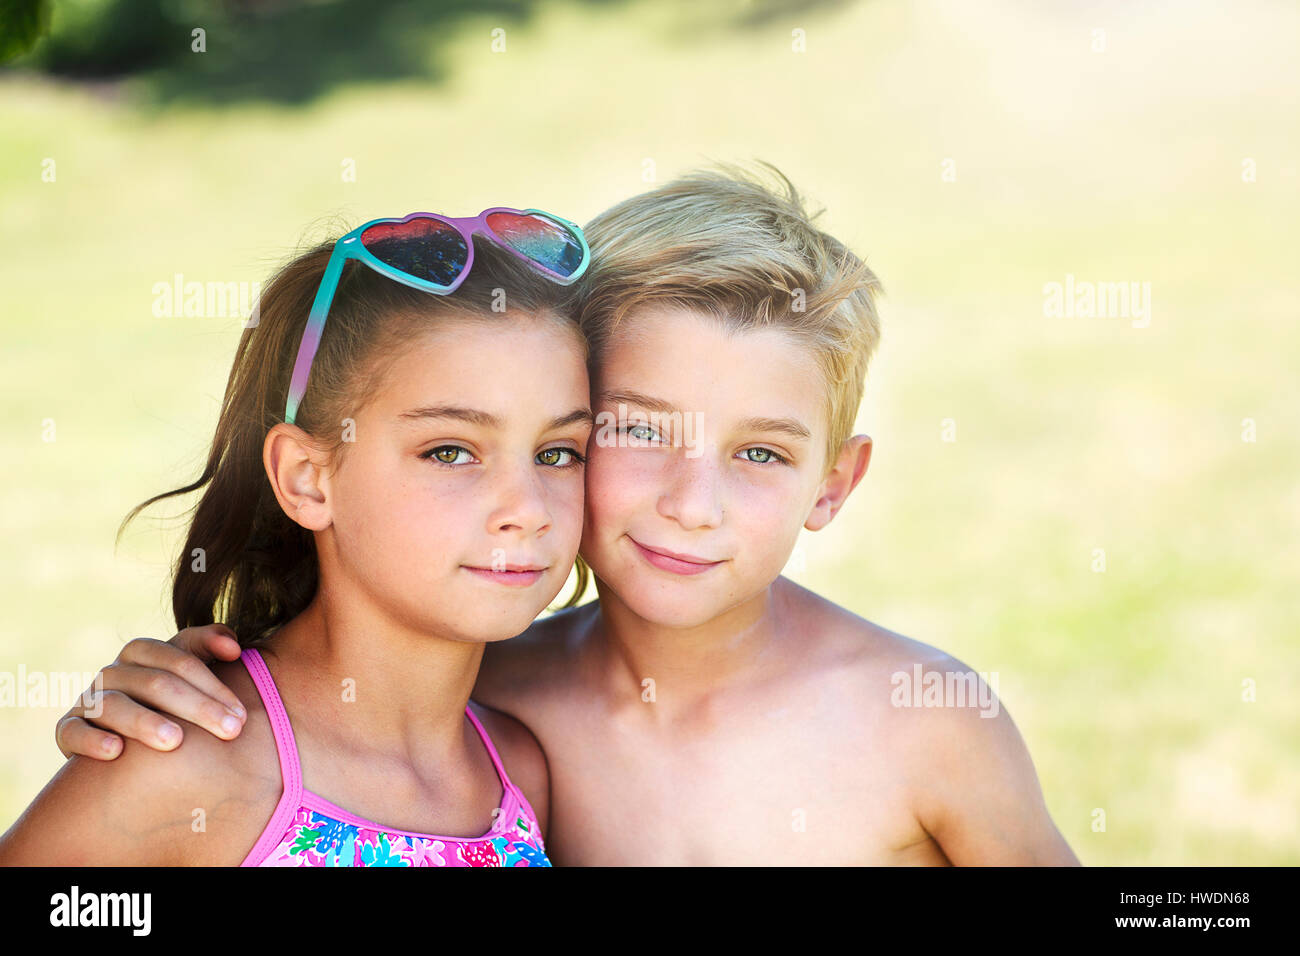 Summer portrait of boy with arm around twin sister Stock Photo